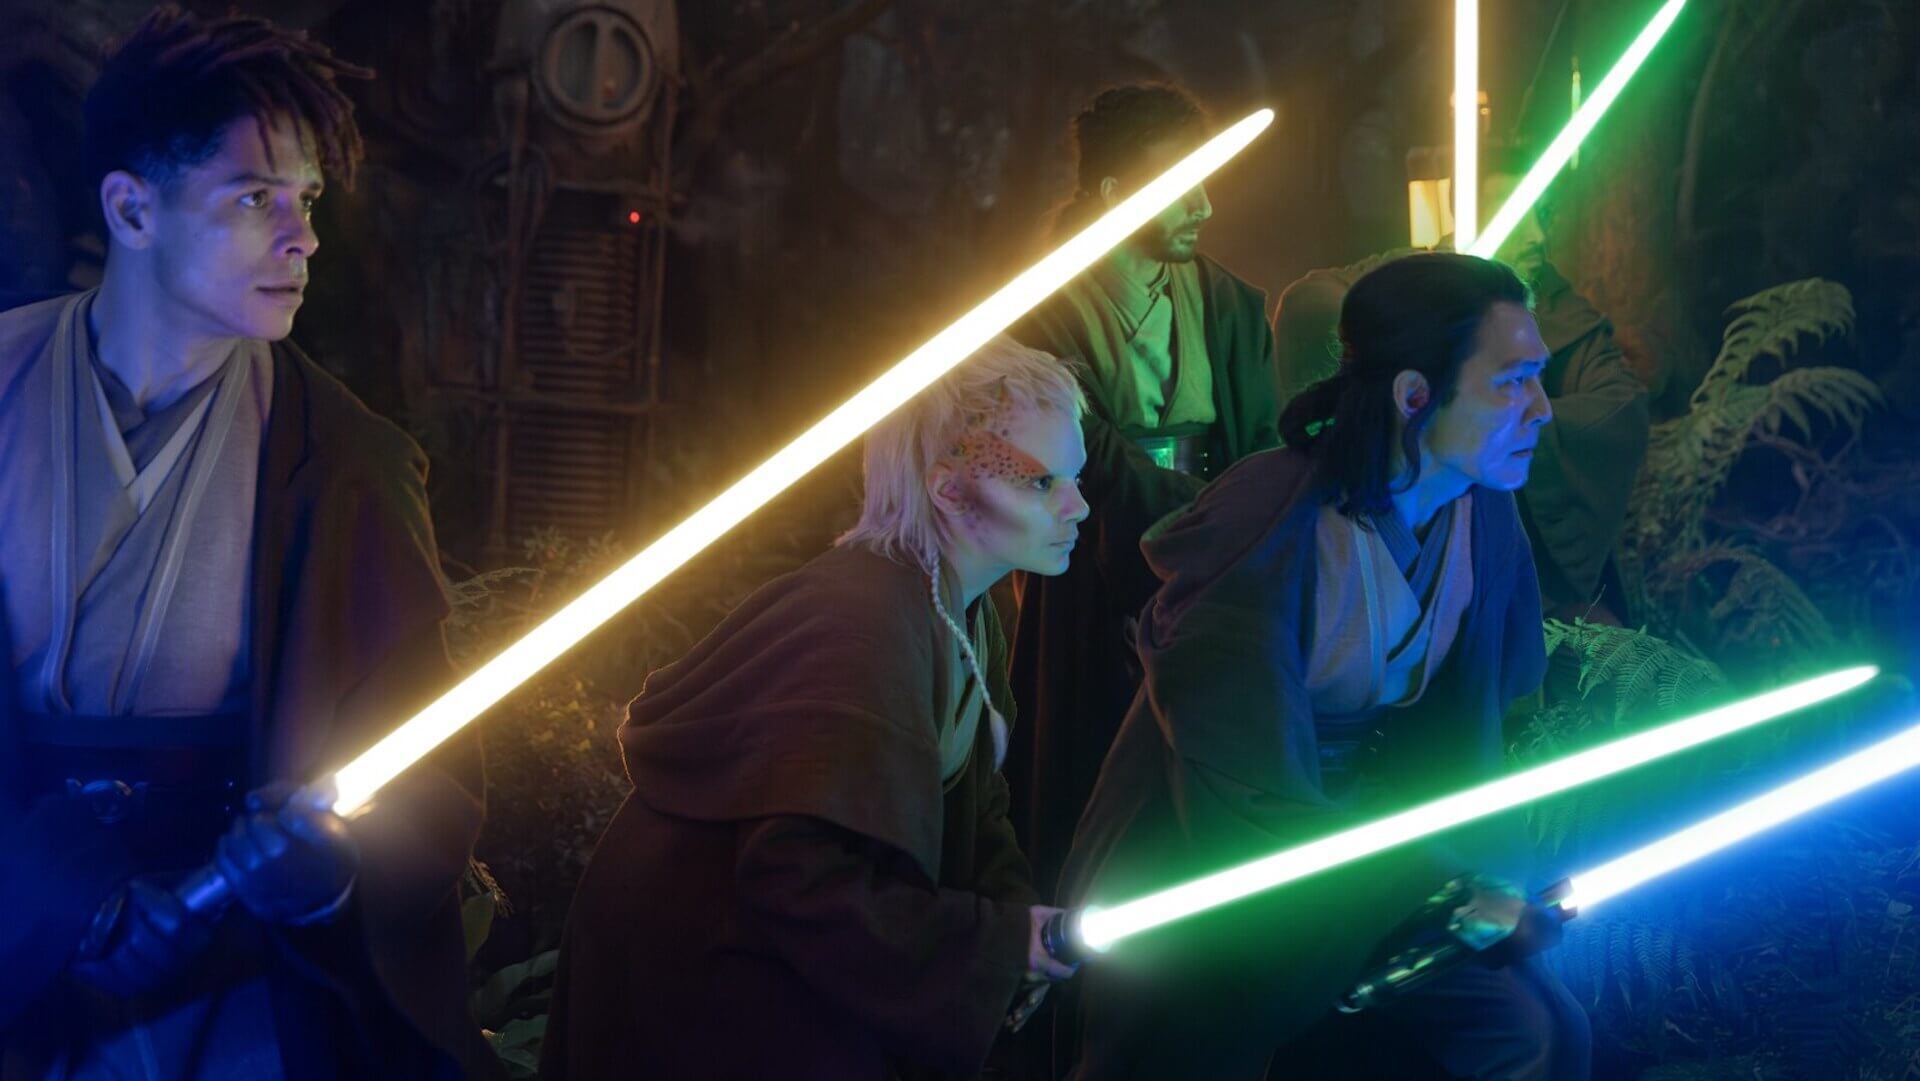 'The Acolyte' cast wielding lightsabers 